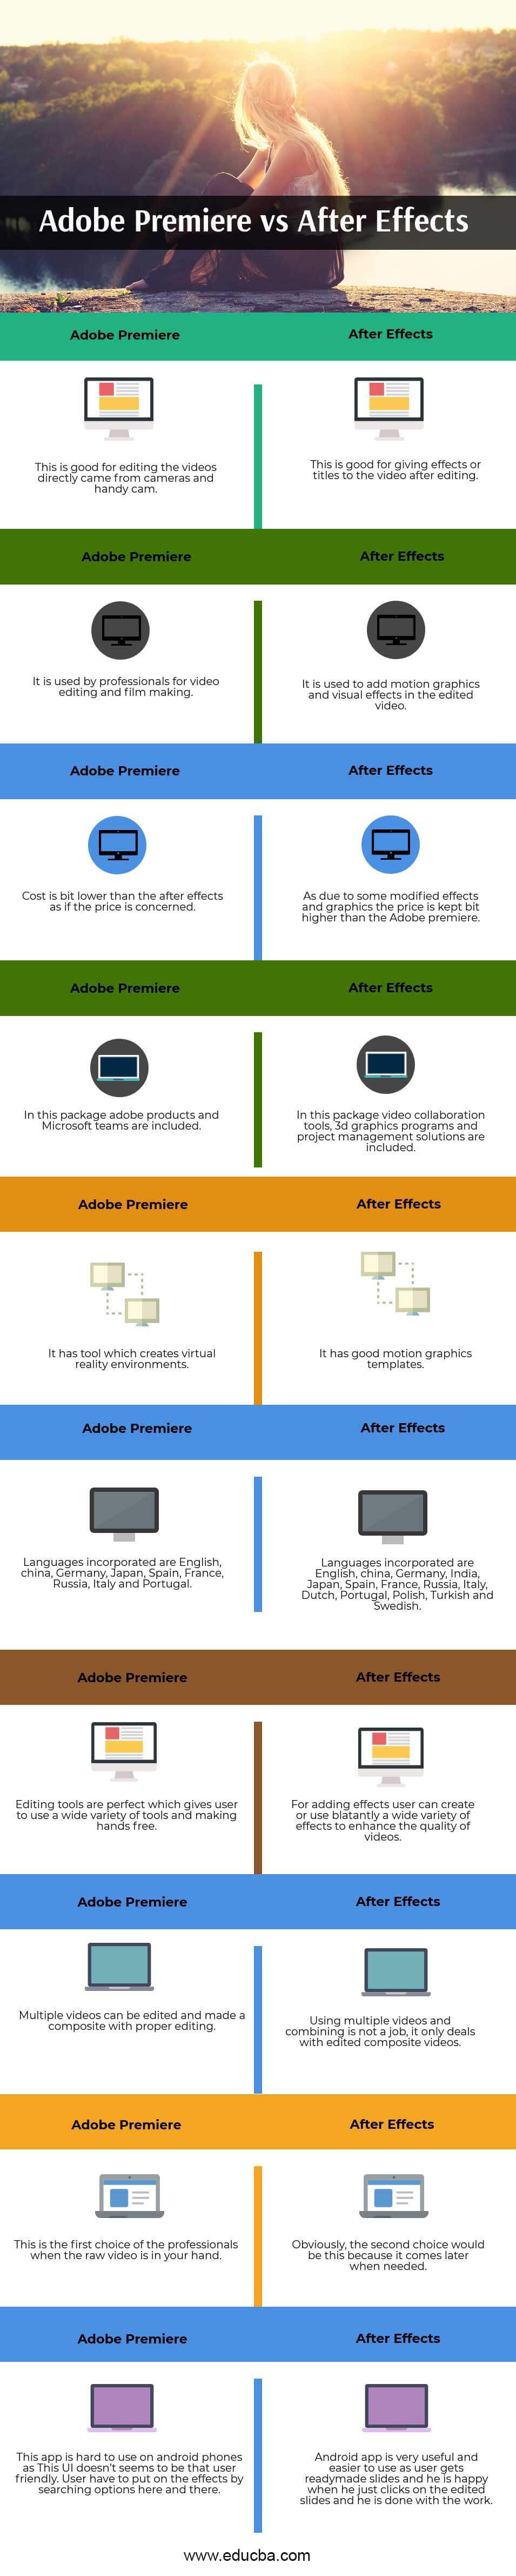 Adobe-Premiere-vs-After-effects